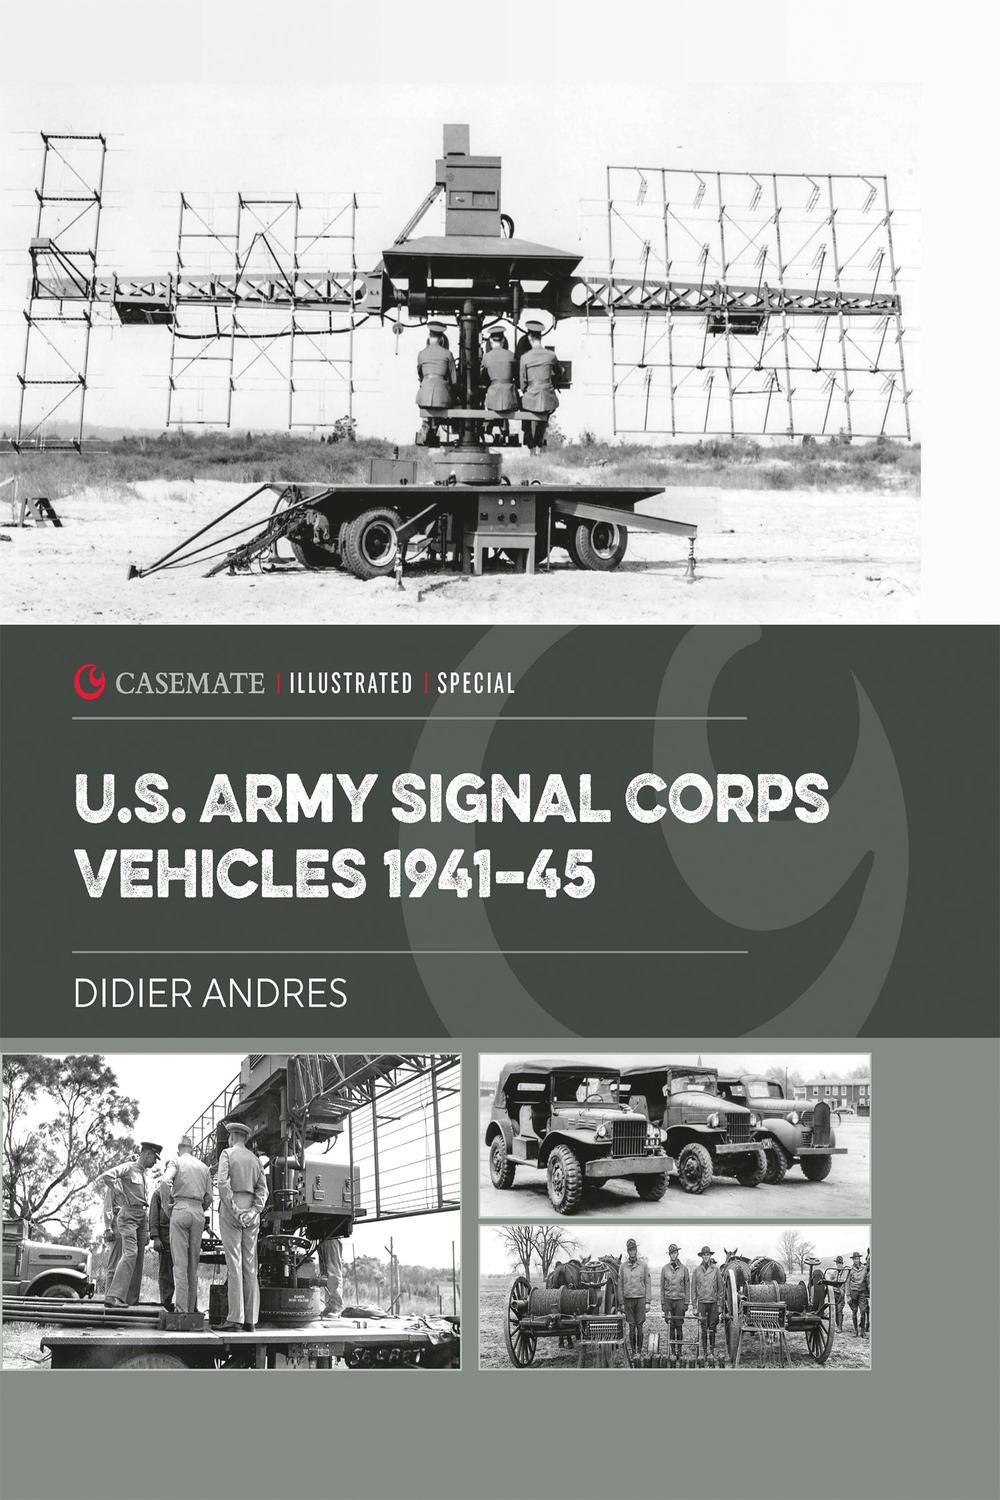 U.S. Army Signal Corps Vehicles 1941-45 - Didier Andres